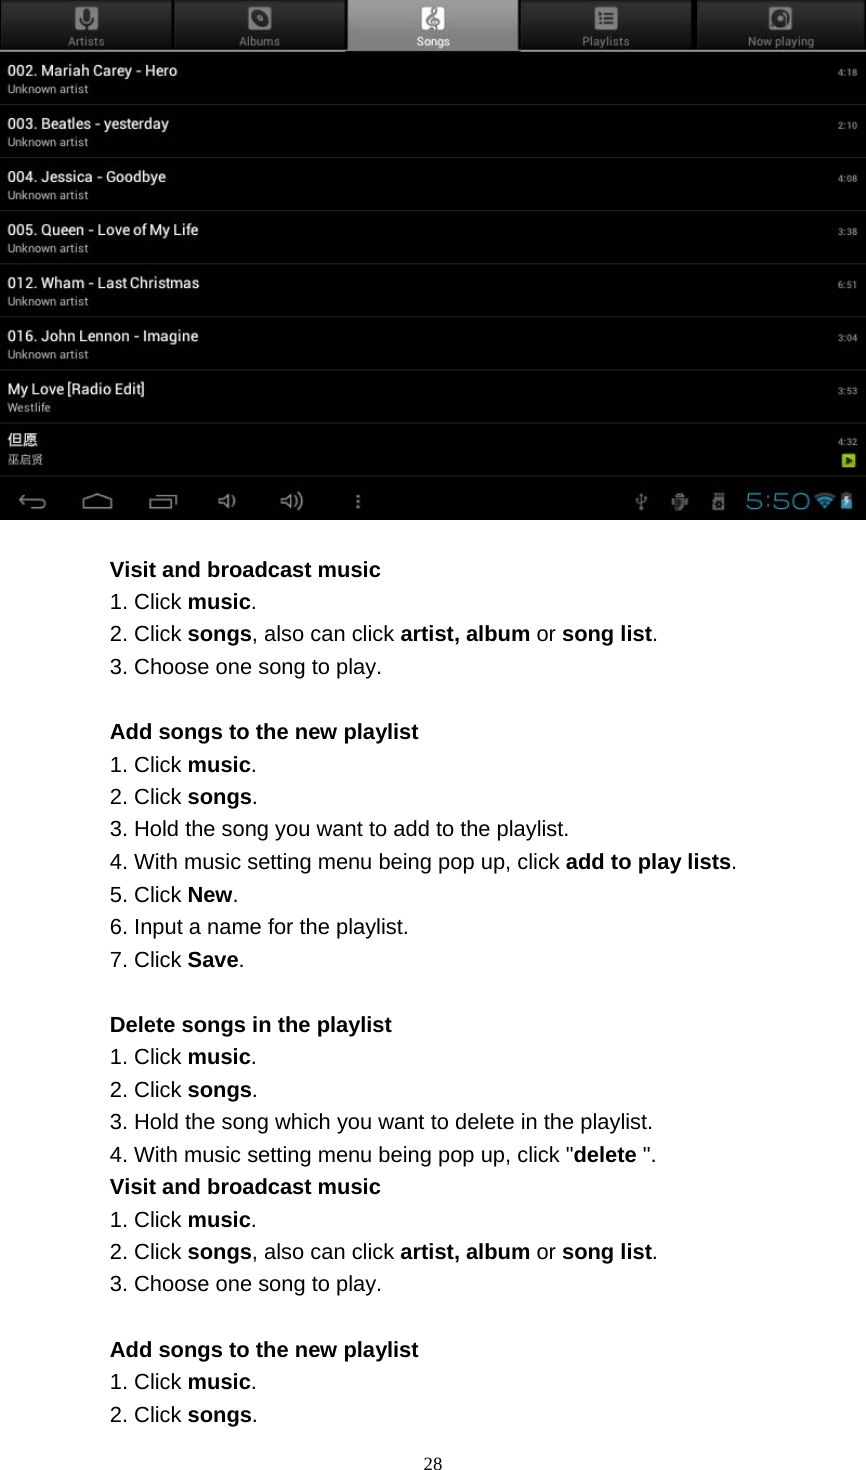    28    Visit and broadcast music 1. Click music. 2. Click songs, also can click artist, album or song list. 3. Choose one song to play.  Add songs to the new playlist 1. Click music. 2. Click songs. 3. Hold the song you want to add to the playlist. 4. With music setting menu being pop up, click add to play lists. 5. Click New. 6. Input a name for the playlist. 7. Click Save.  Delete songs in the playlist 1. Click music. 2. Click songs. 3. Hold the song which you want to delete in the playlist. 4. With music setting menu being pop up, click &quot;delete &quot;. Visit and broadcast music 1. Click music. 2. Click songs, also can click artist, album or song list. 3. Choose one song to play.  Add songs to the new playlist 1. Click music. 2. Click songs. 